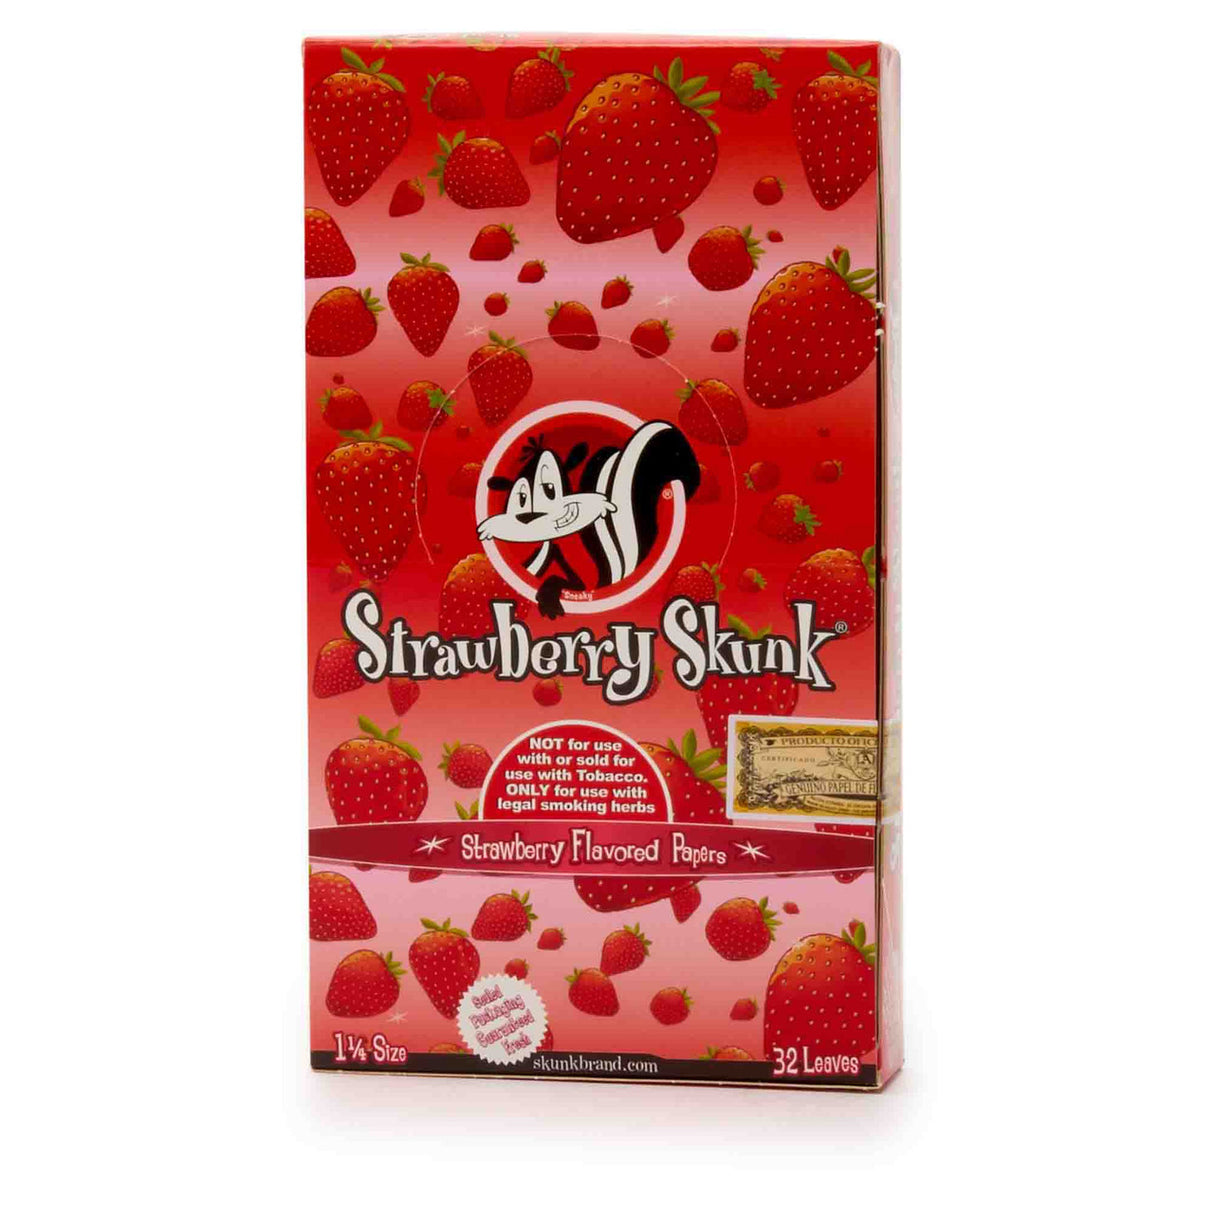 Yummy Strawberry flavored rolling papers for dry herbs